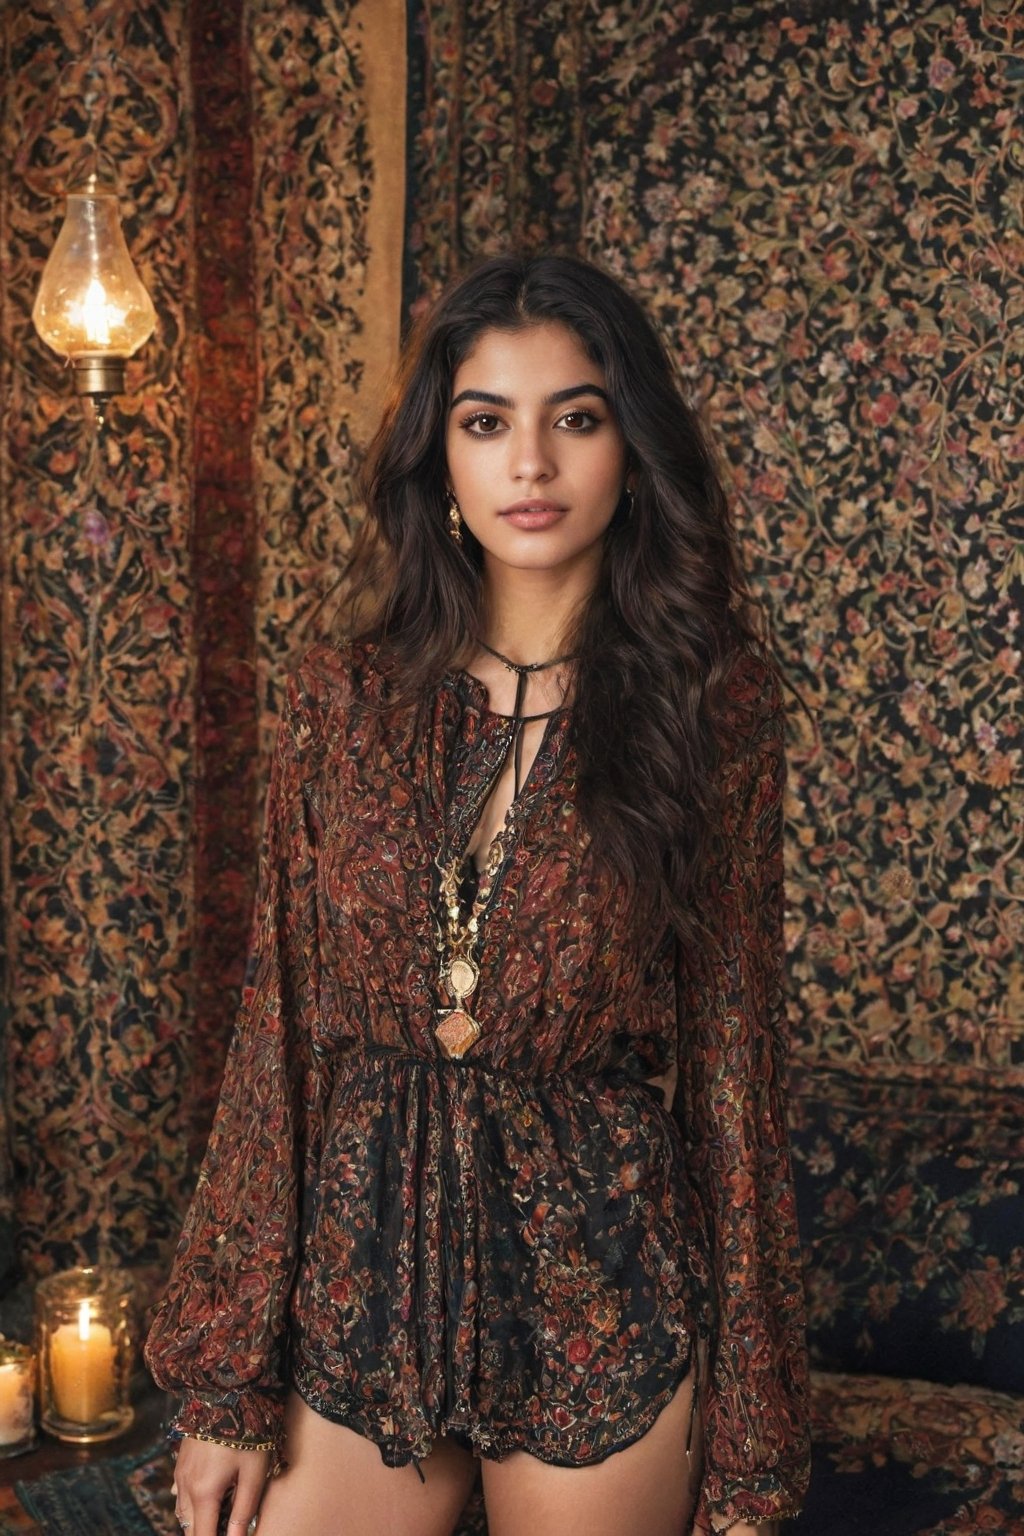 Generate hyper realistic image of a 20-year-old Persian woman in a bohemian-inspired, covered ensemble, celebrating her hourglass silhouette. Dark makeup complements her bold and playful character, capturing her carefree spirit at home.upper body shot.Extremely Realistic